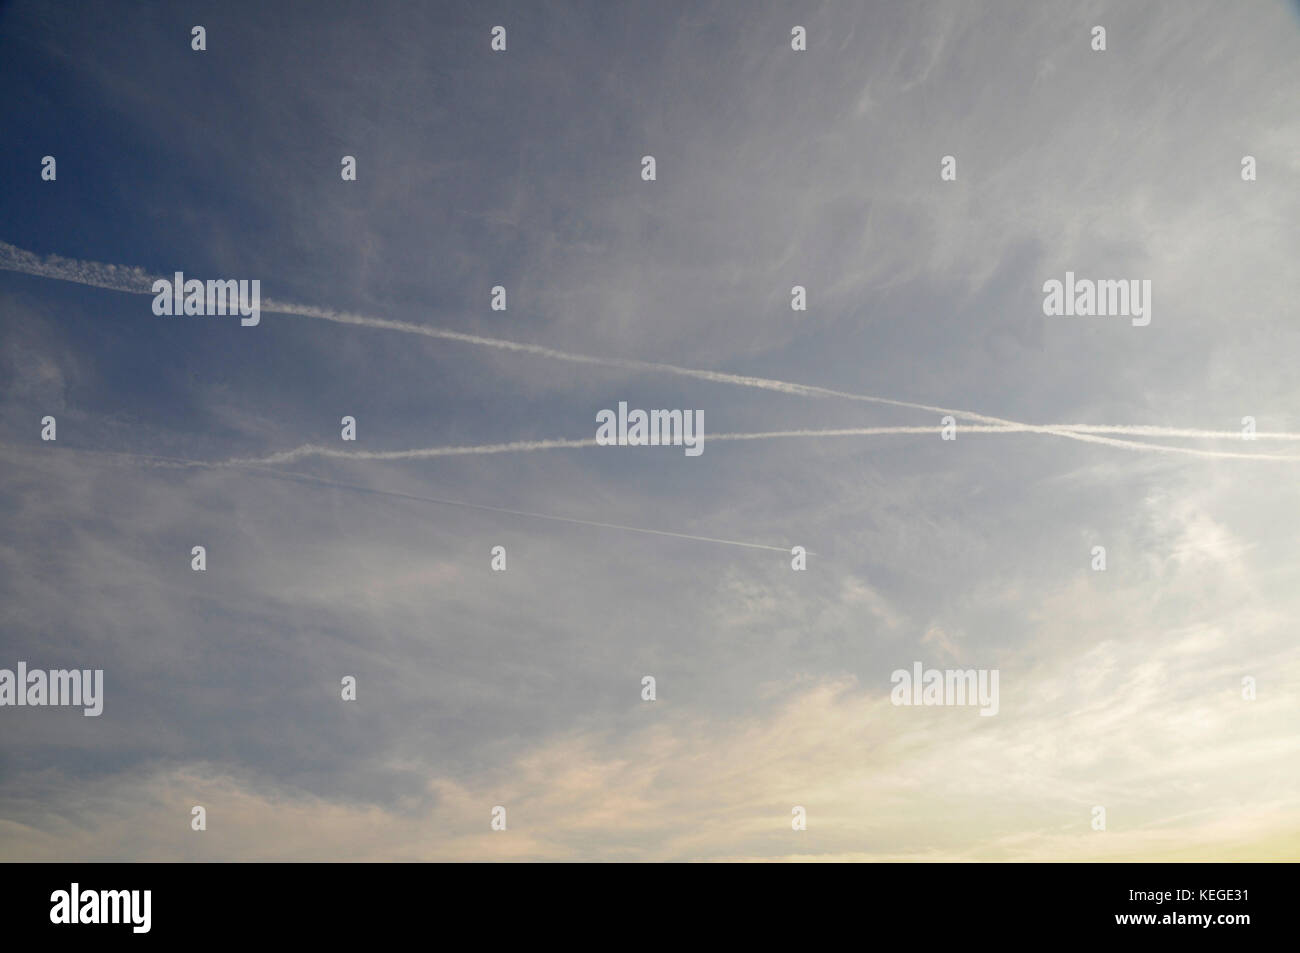 Airplane vapor trails crossing in the sky horizontal photo Stock Photo